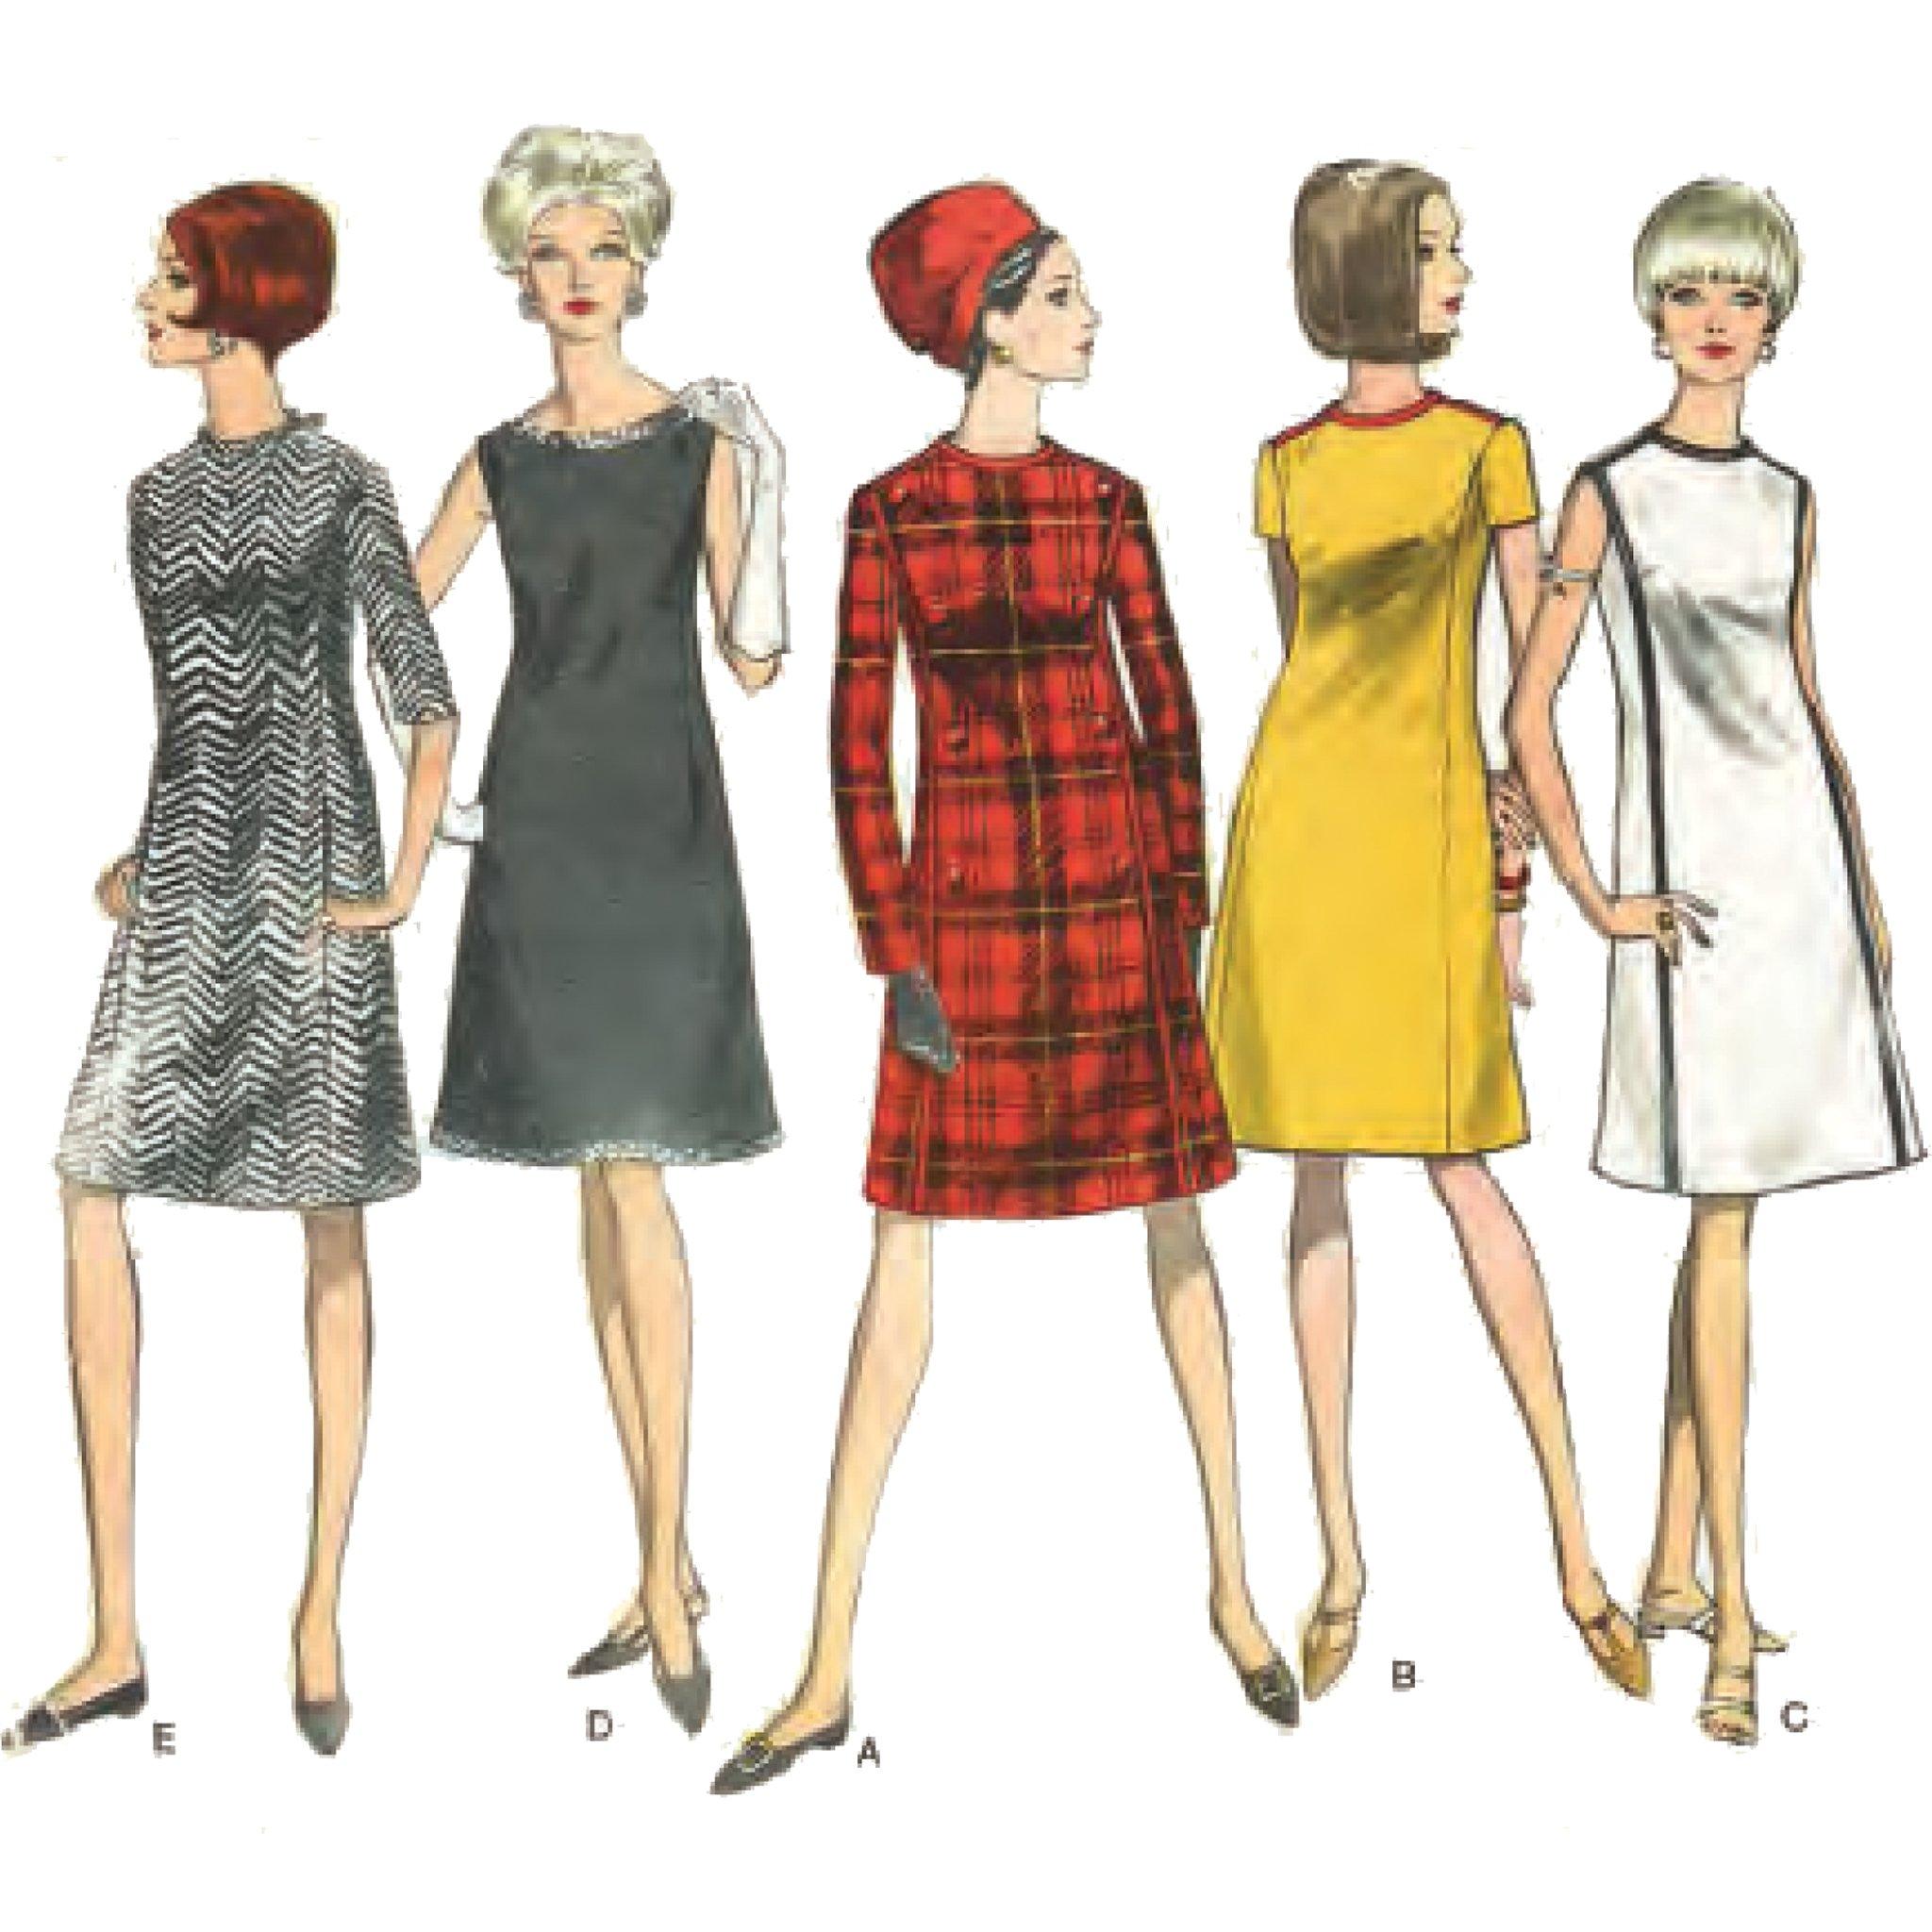 Combined a 60's vintage mod dress pattern with African fabric, and